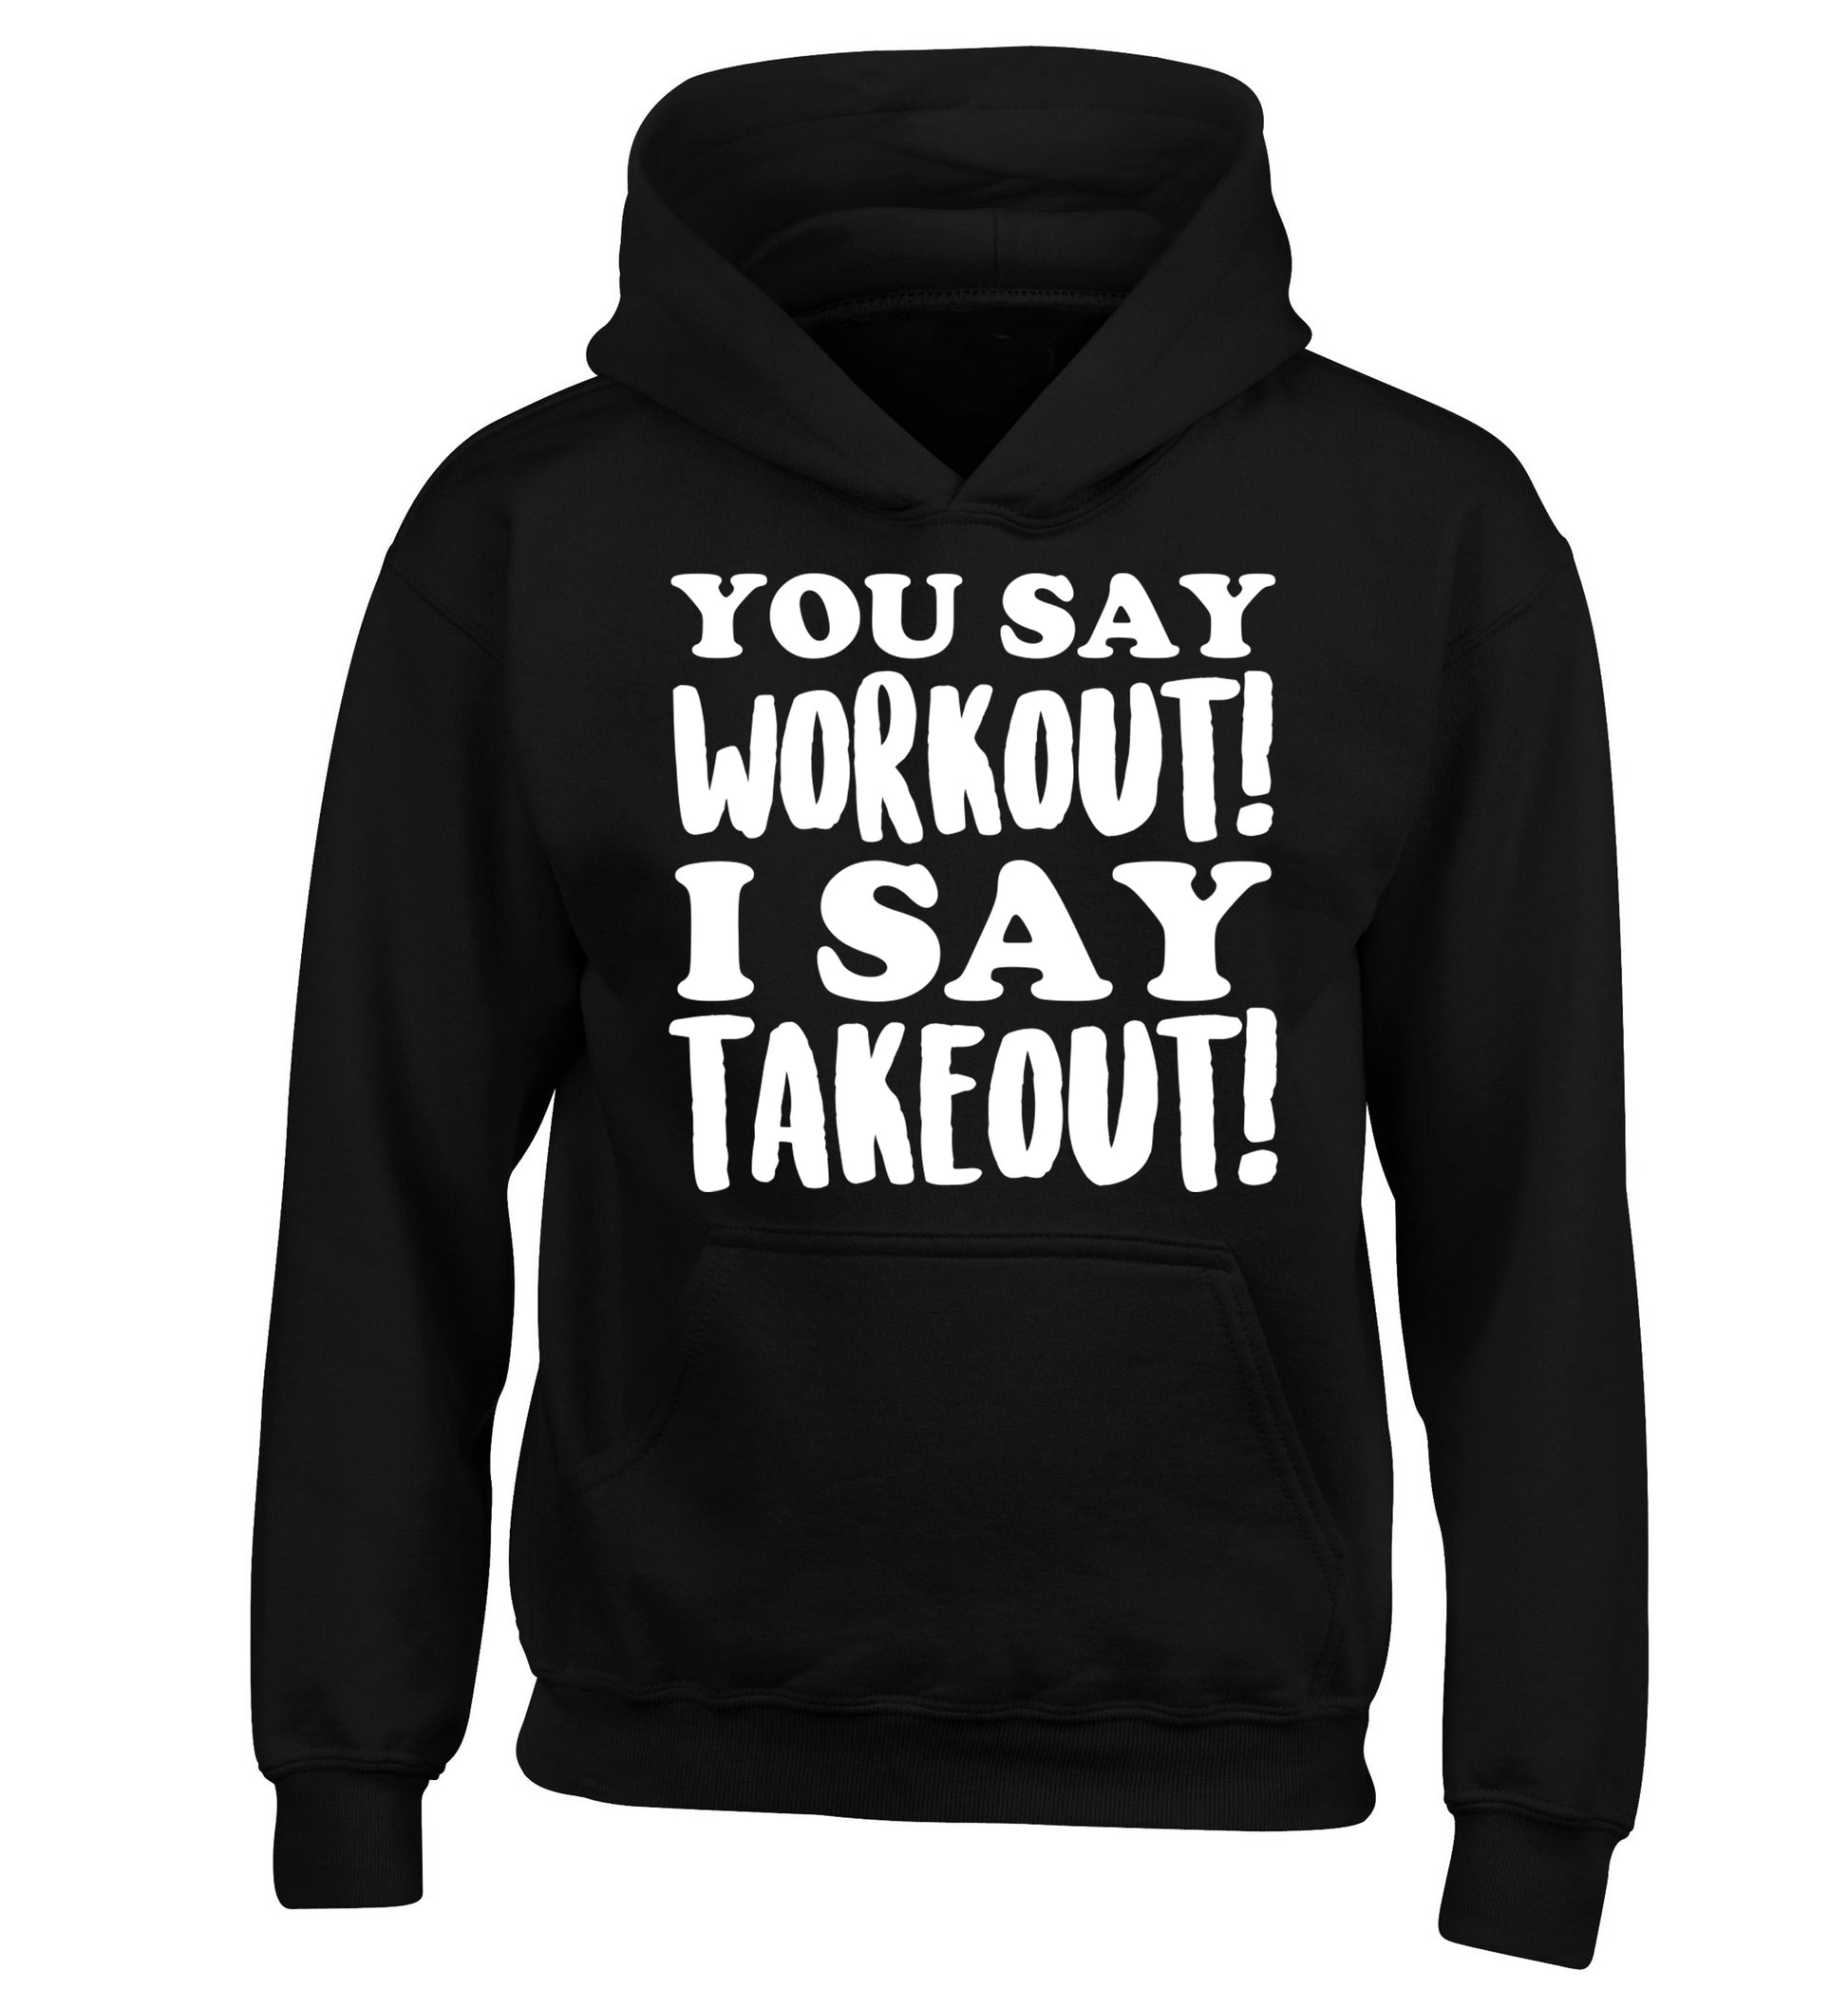 You say workout I say takeout! children's black hoodie 12-14 Years